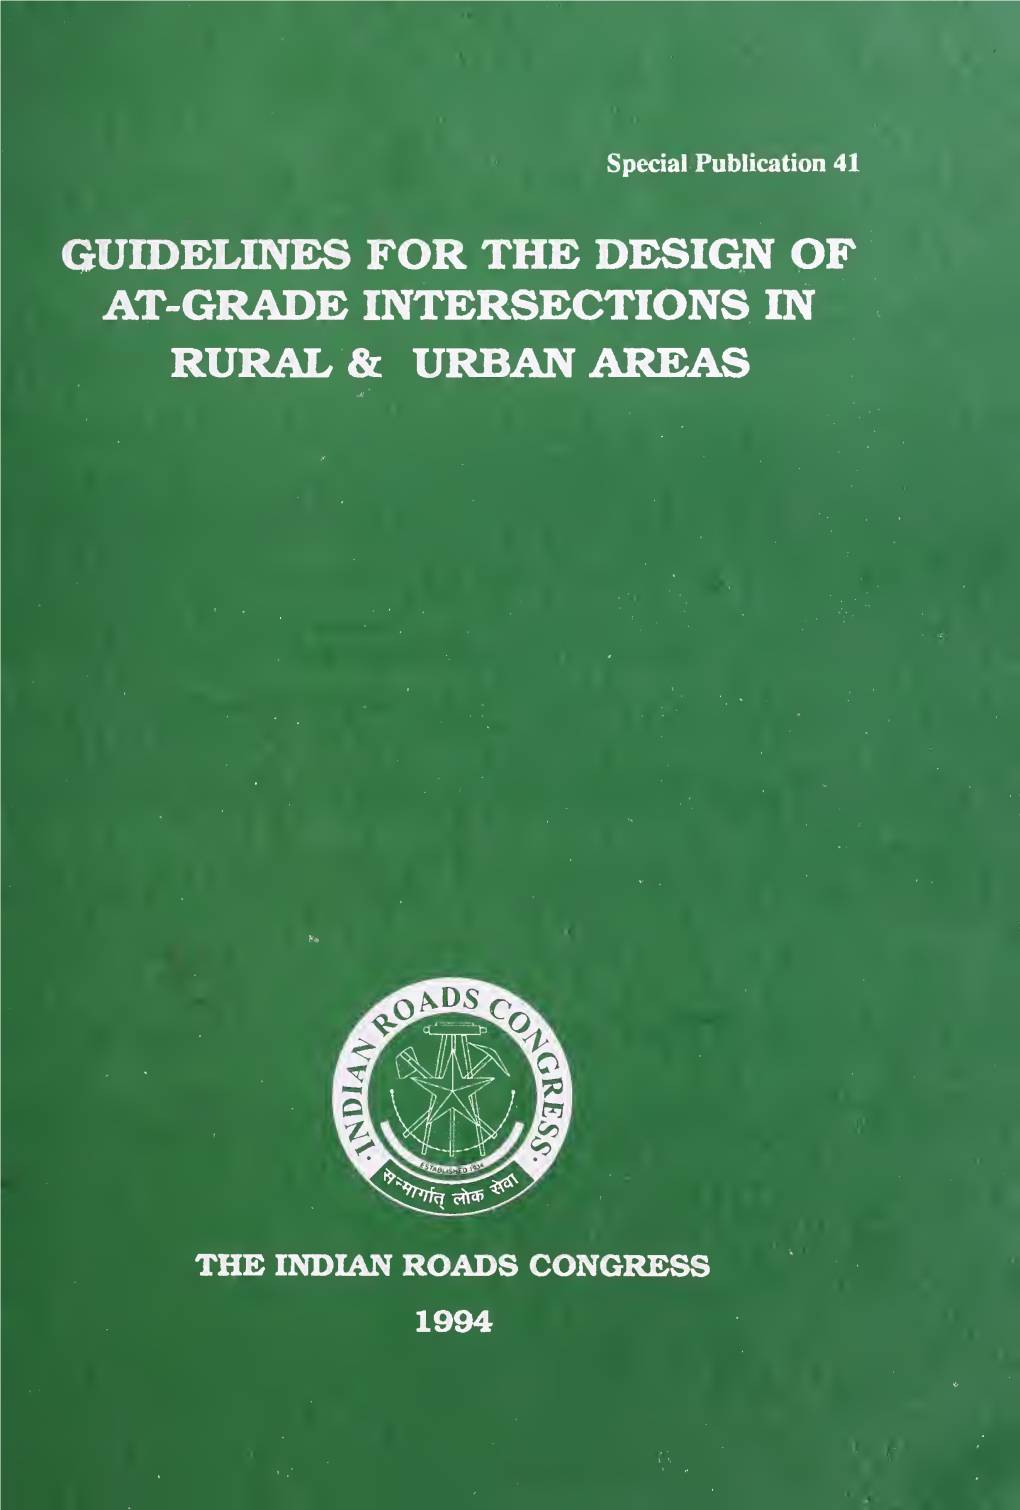 IRC SP 041: Guidelines for the Design of At-Grade Intersections in Rural and Urban Areas